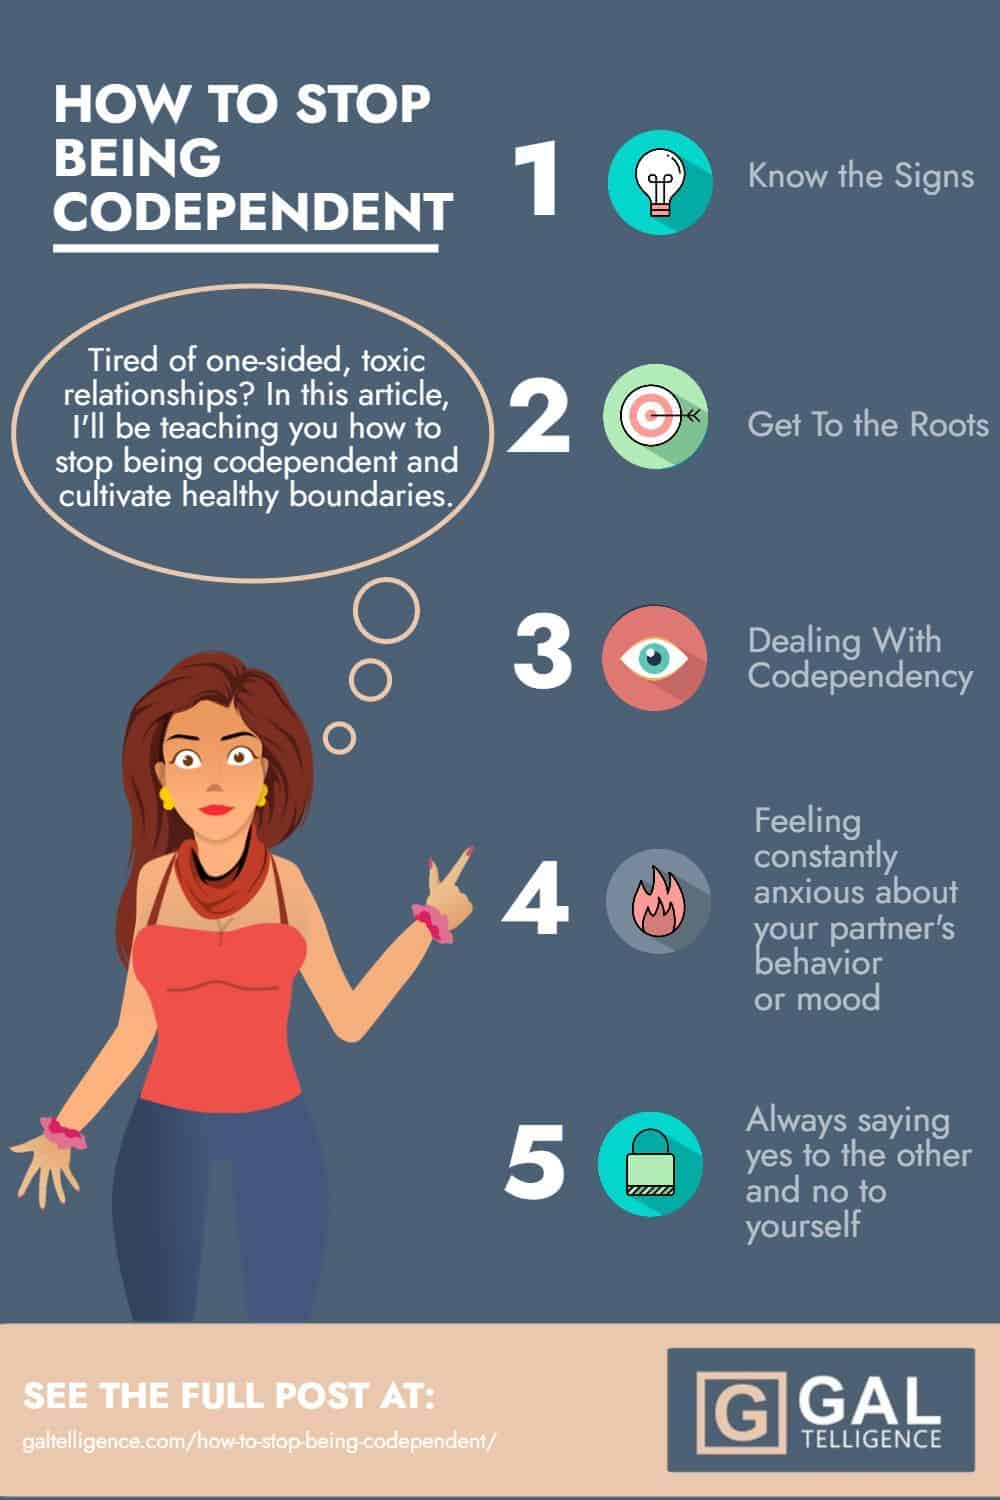 How To Stop Being Codependent - Infographic